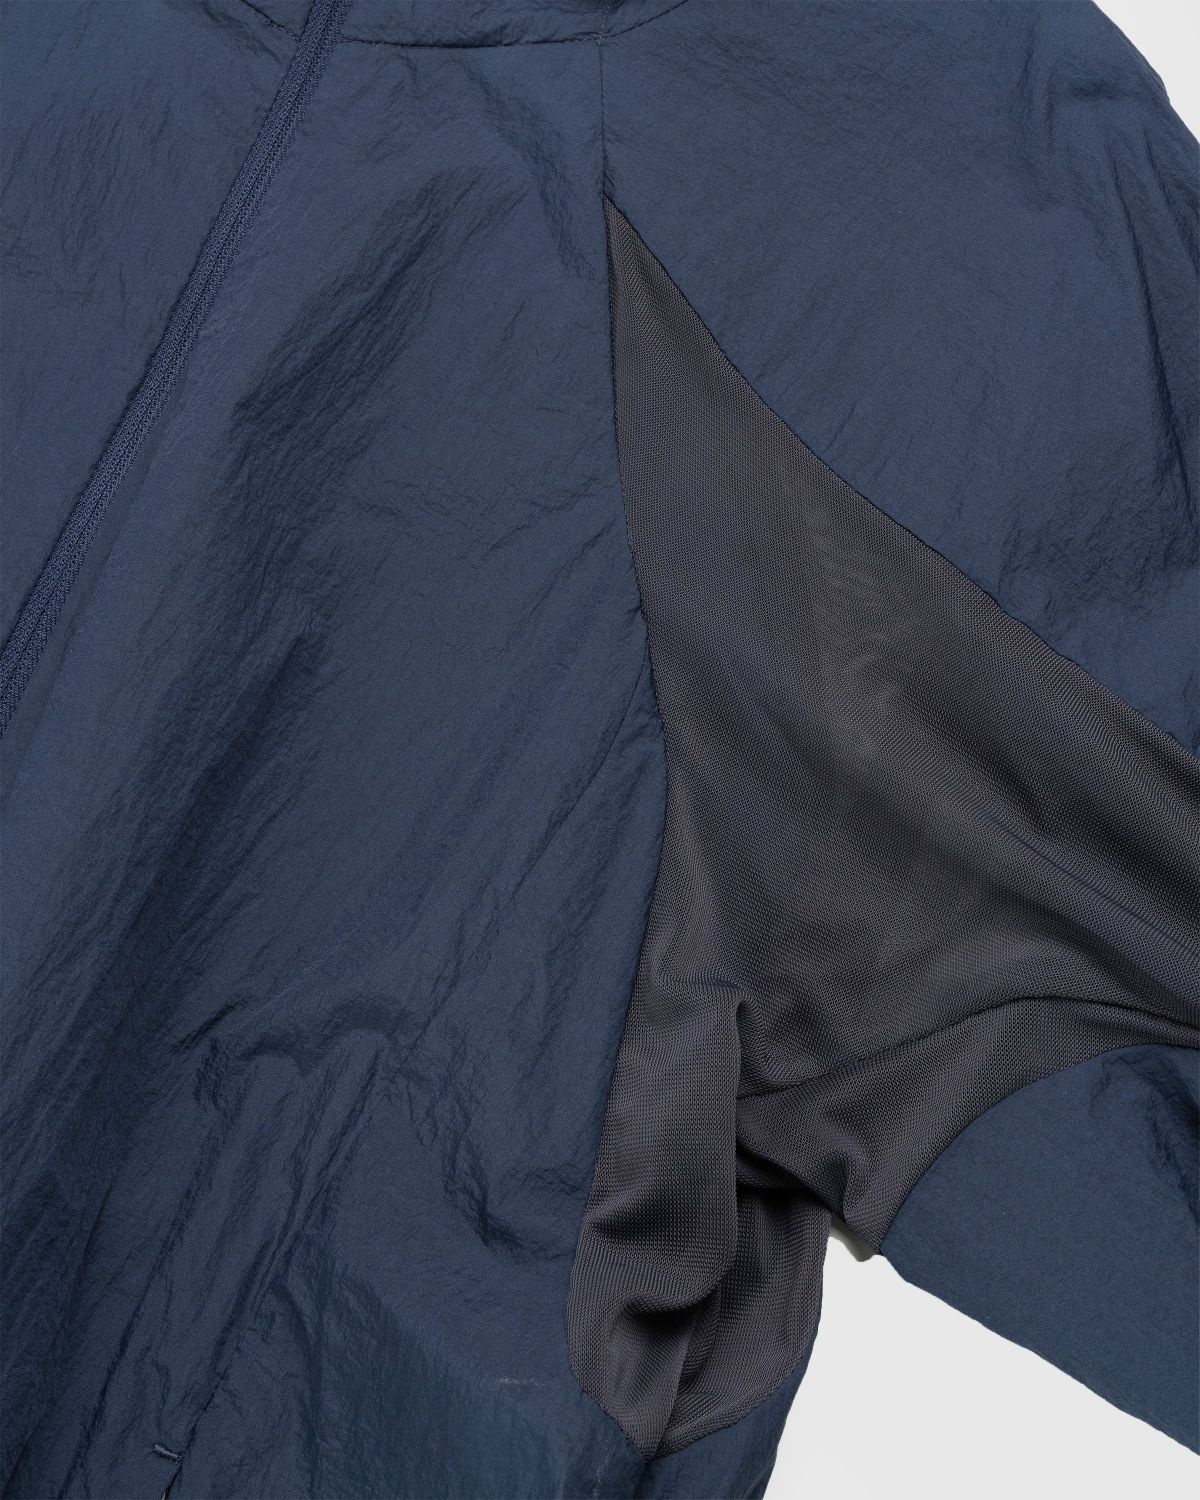 Post Archive Faction (PAF) – 5.0+ Technical Jacket Right Navy - 6